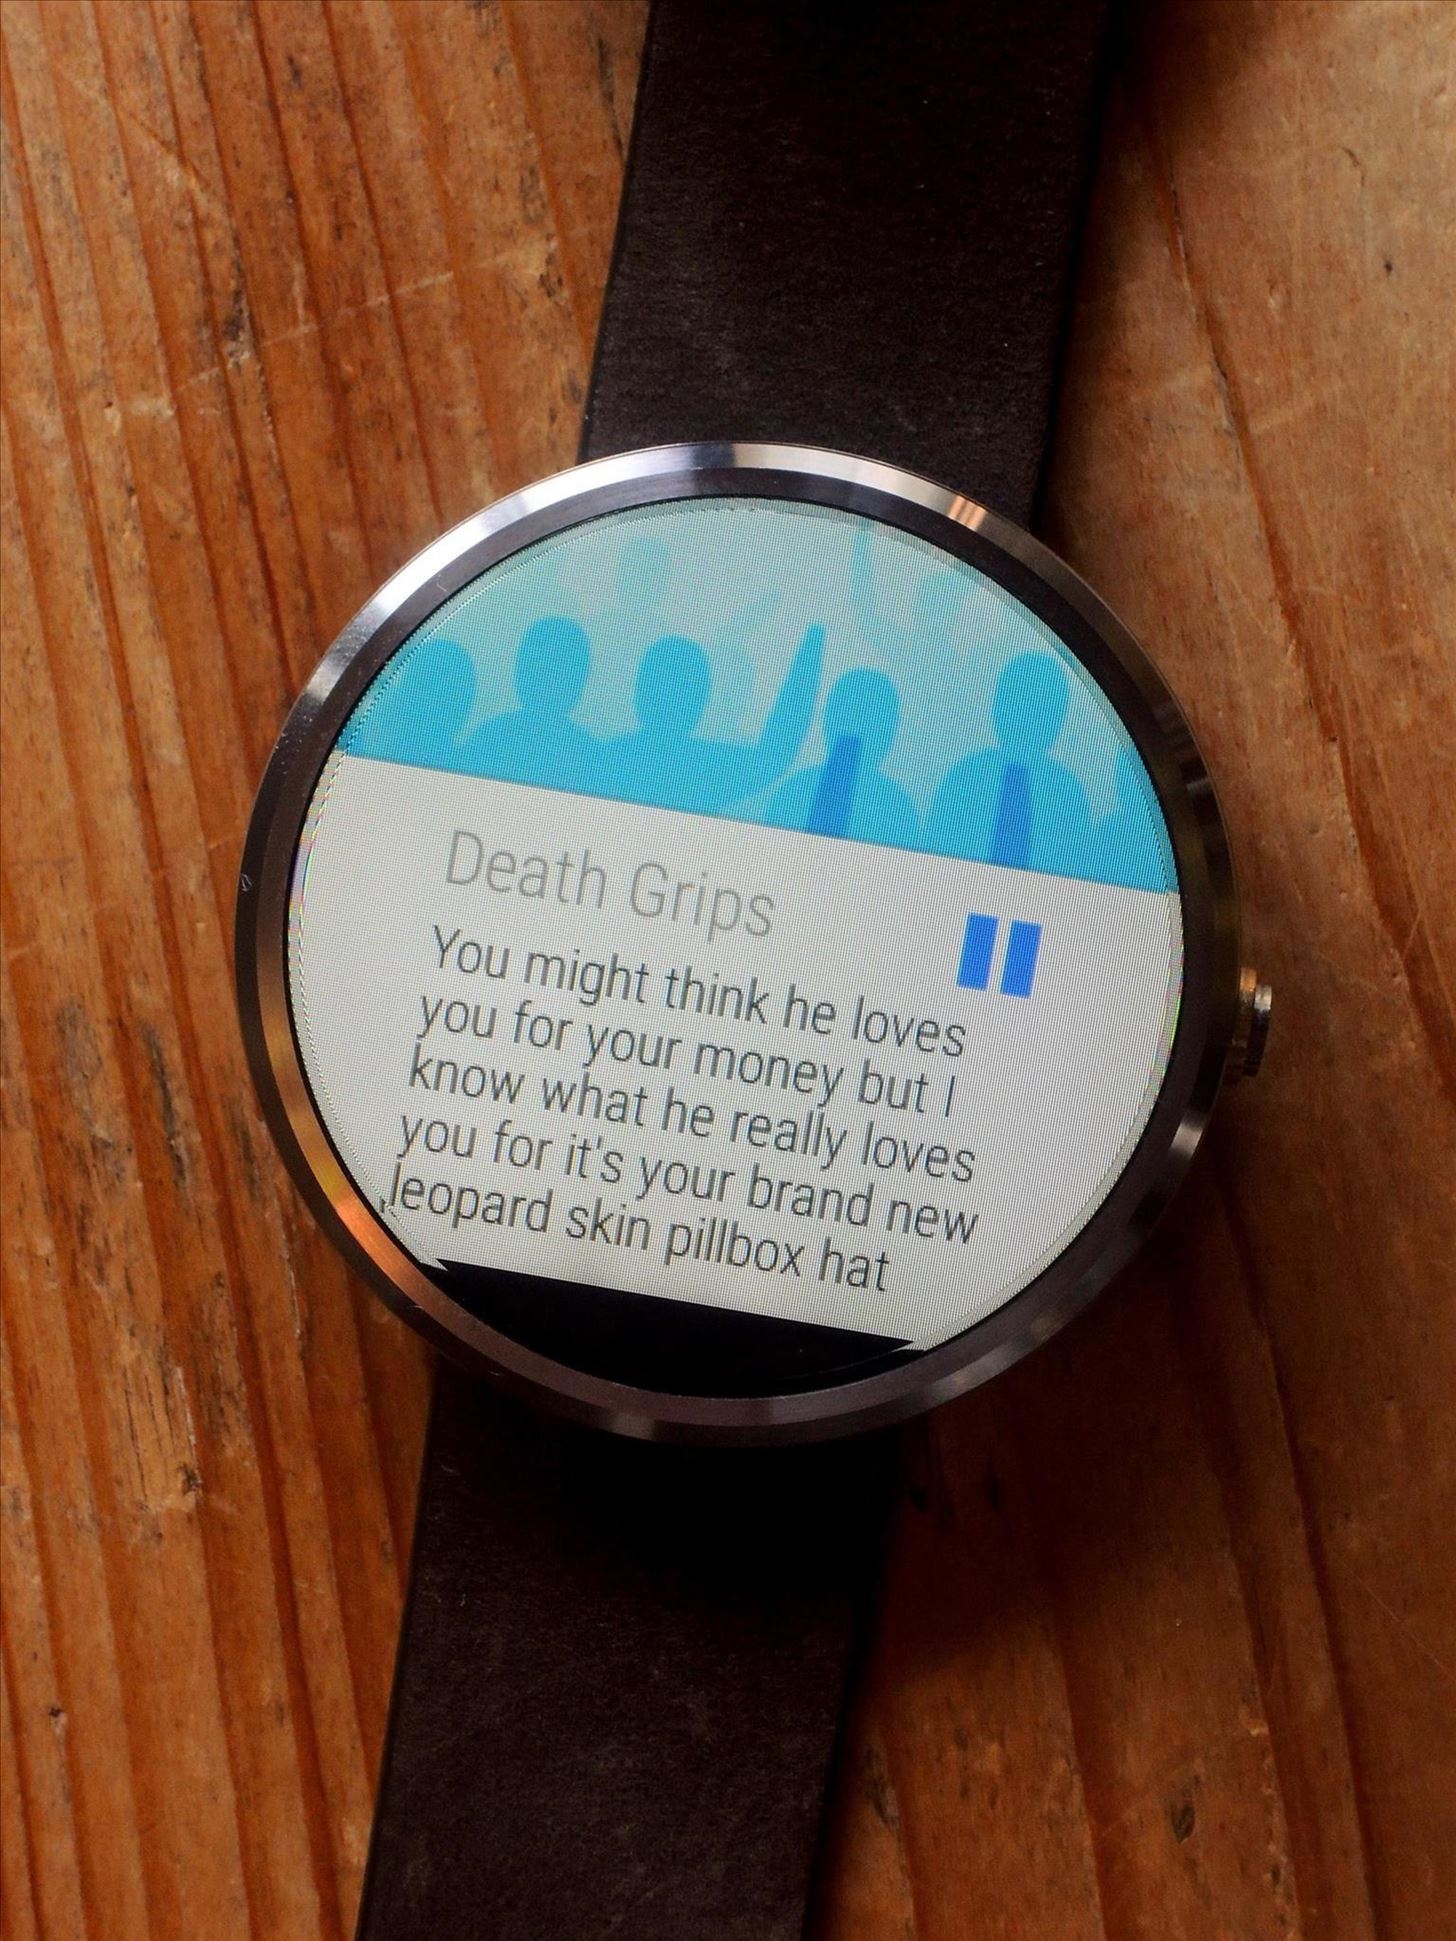 How to Set Up & Use an Android Wear Smartwatch on Your iPhone